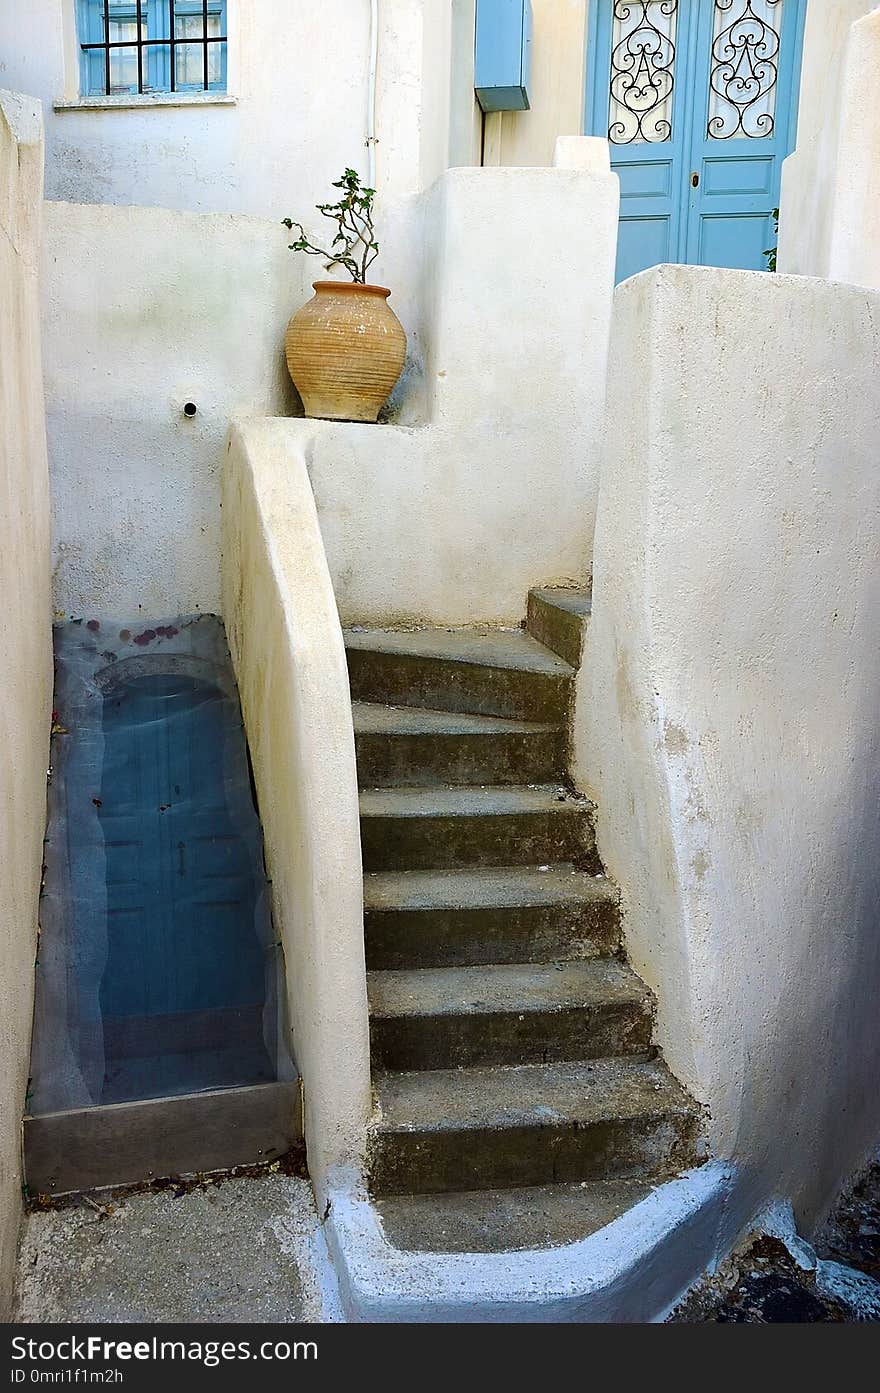 Crete architecture. White wall, blue doors and window, staircase and flower in clay pot. Greece. Crete architecture. White wall, blue doors and window, staircase and flower in clay pot. Greece